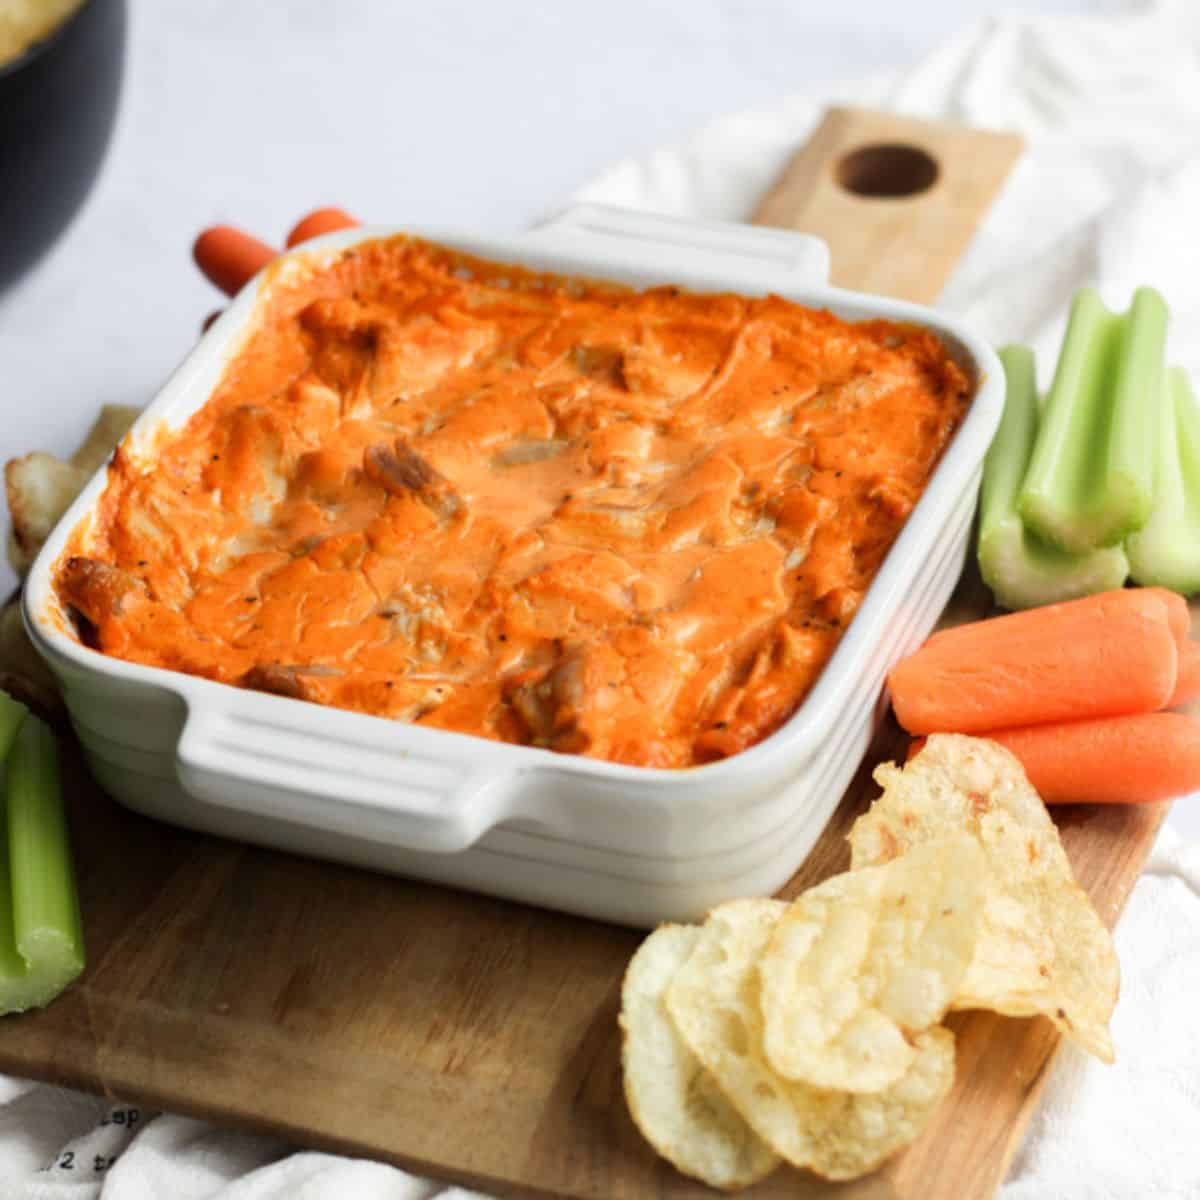 dairy free buffalo chicken dip in a white baking dish surrounded by carrots, celery, and potato chips.